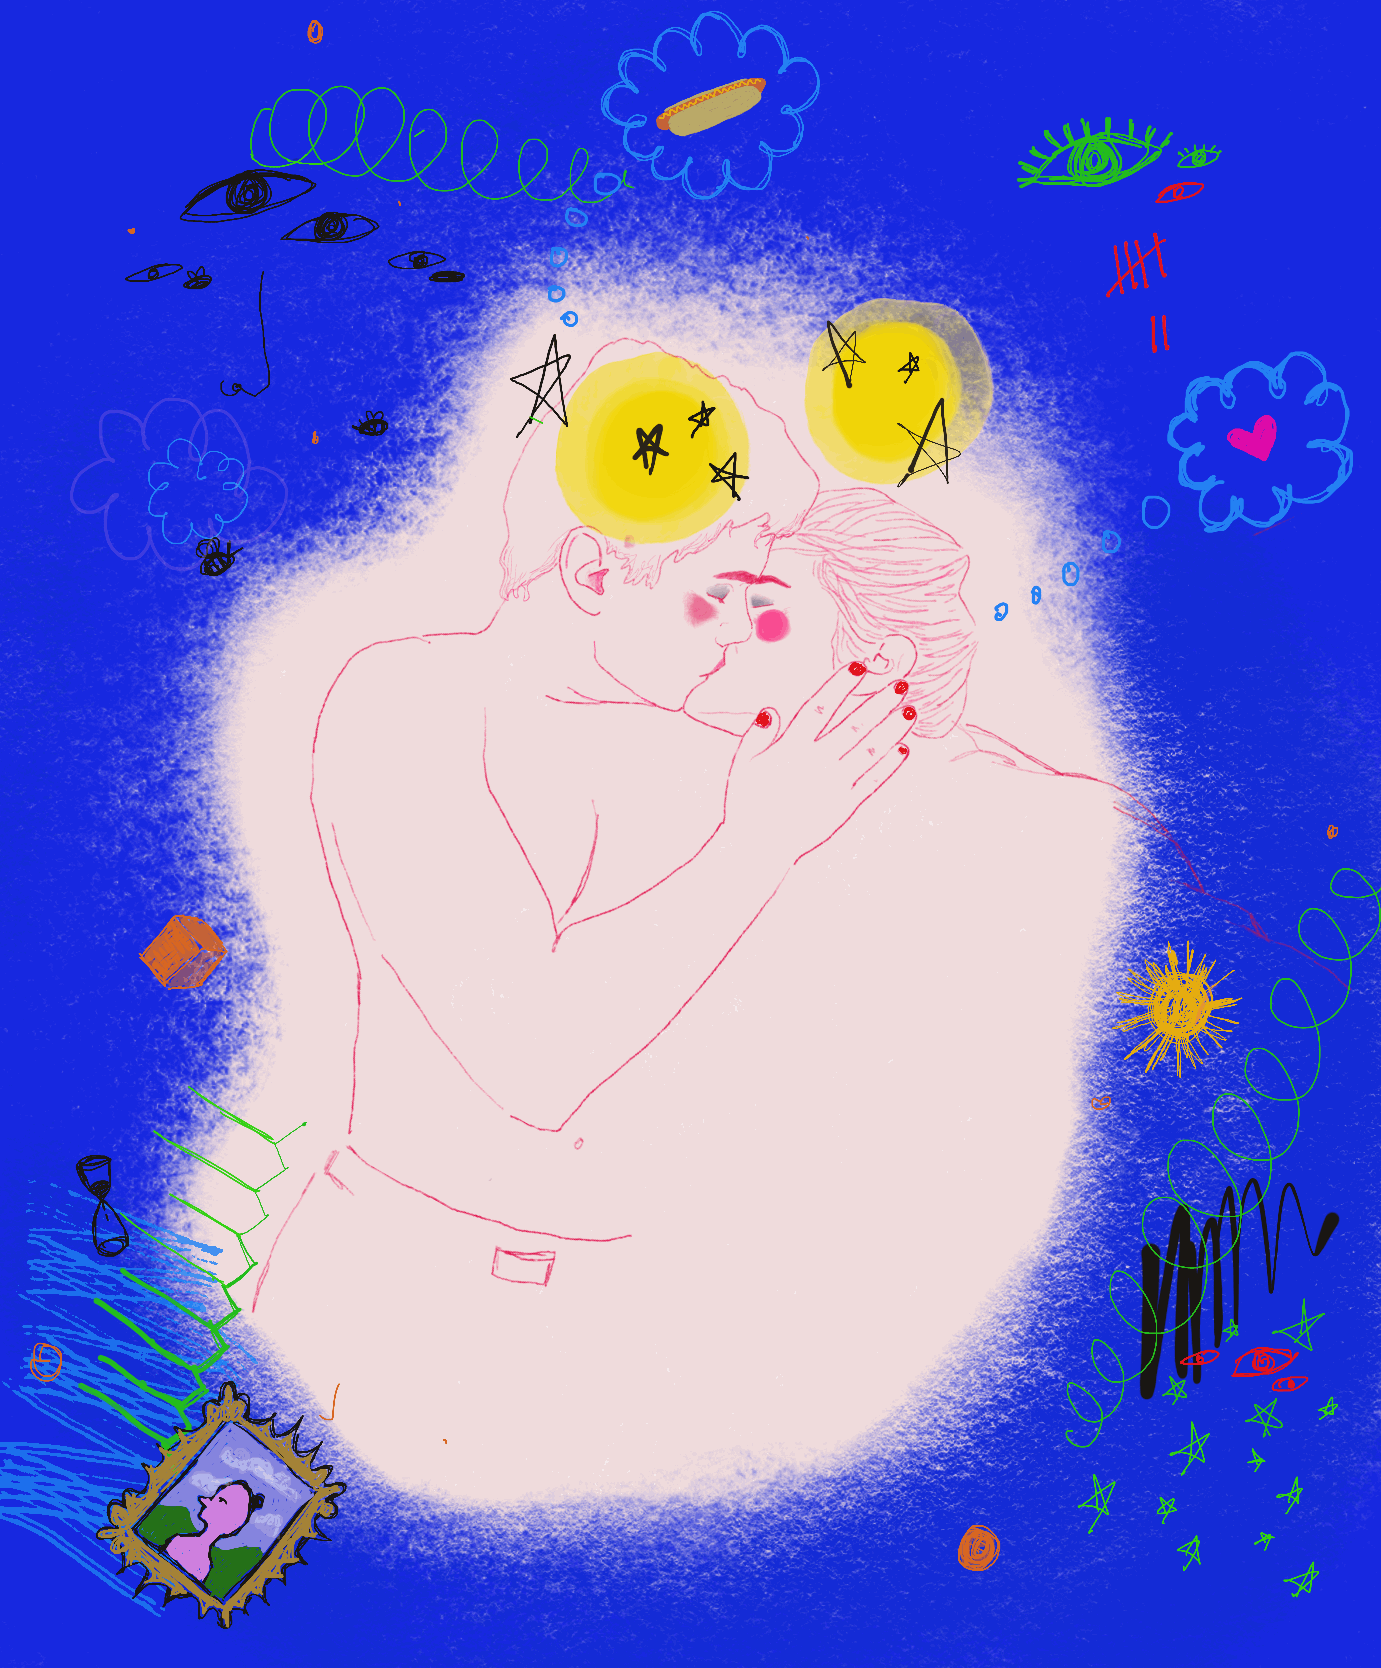 Schoolboy Lover acid aesthetic animation couple crush design digital art drawing gif illustration kisses love motion graphics playful procreate psychedelic relationships school surreal trippy